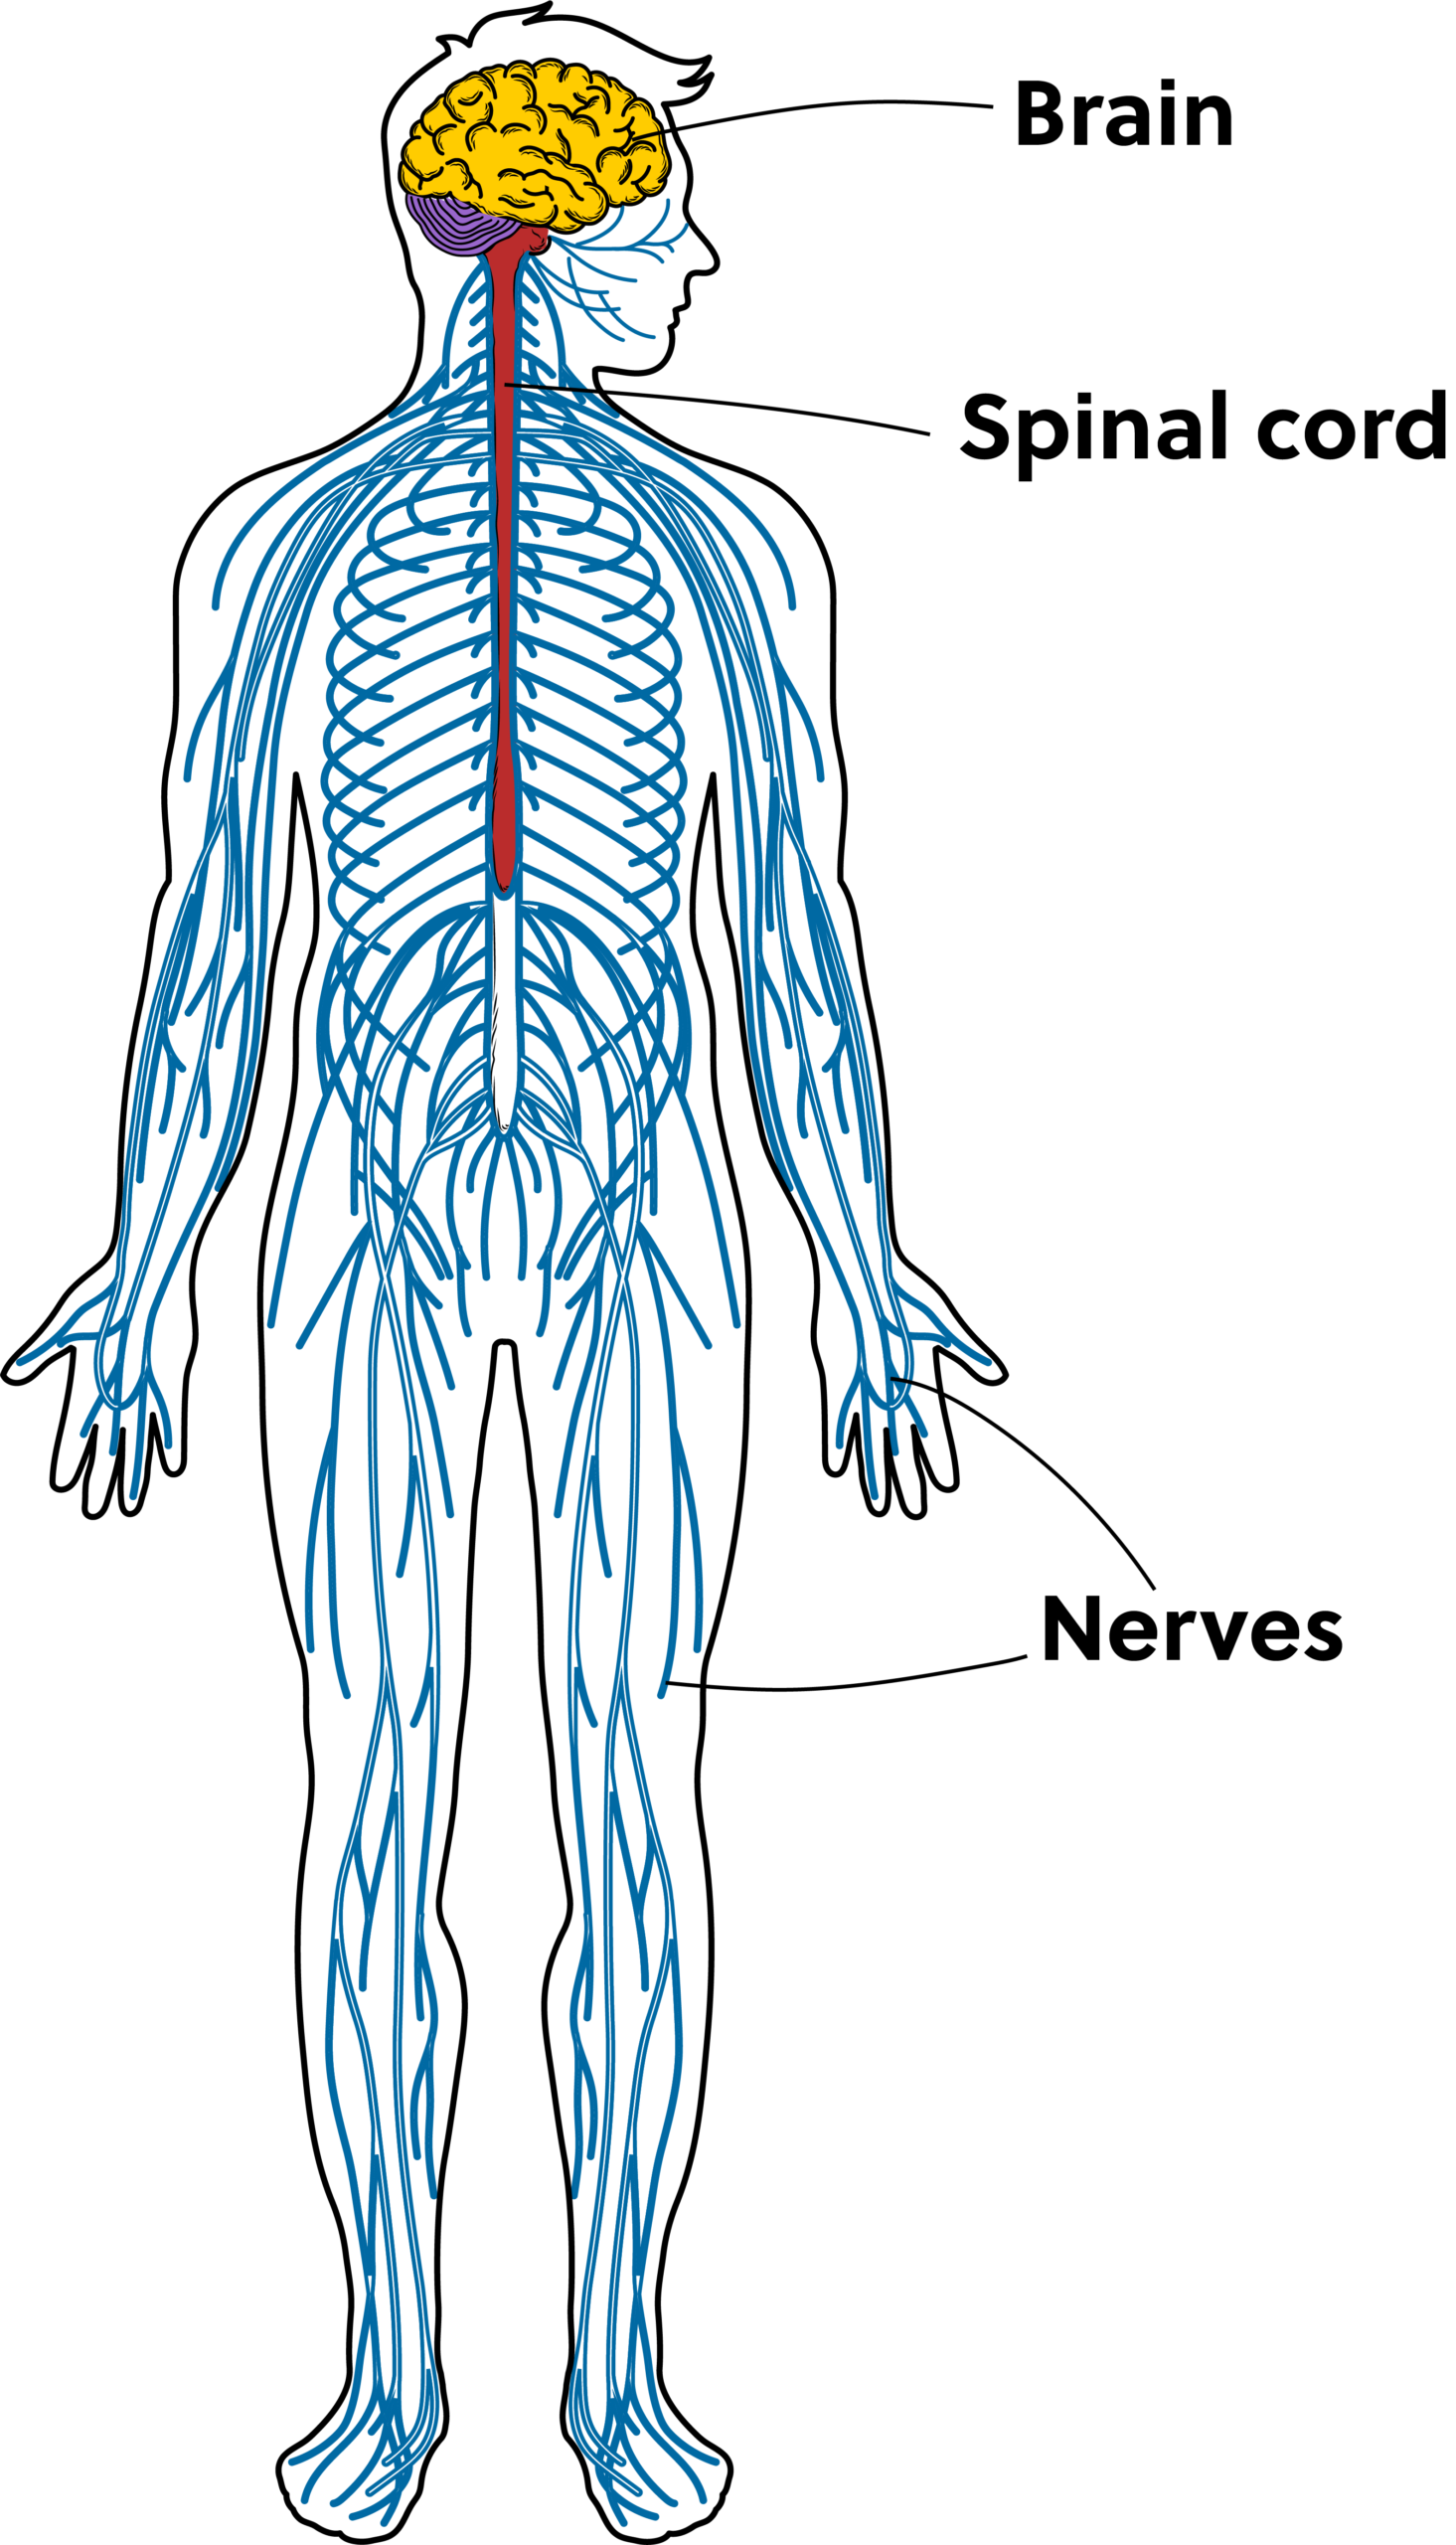 Diagram of the human nervous system showing the brain, spinal cord, and peripheral nerves labeled.